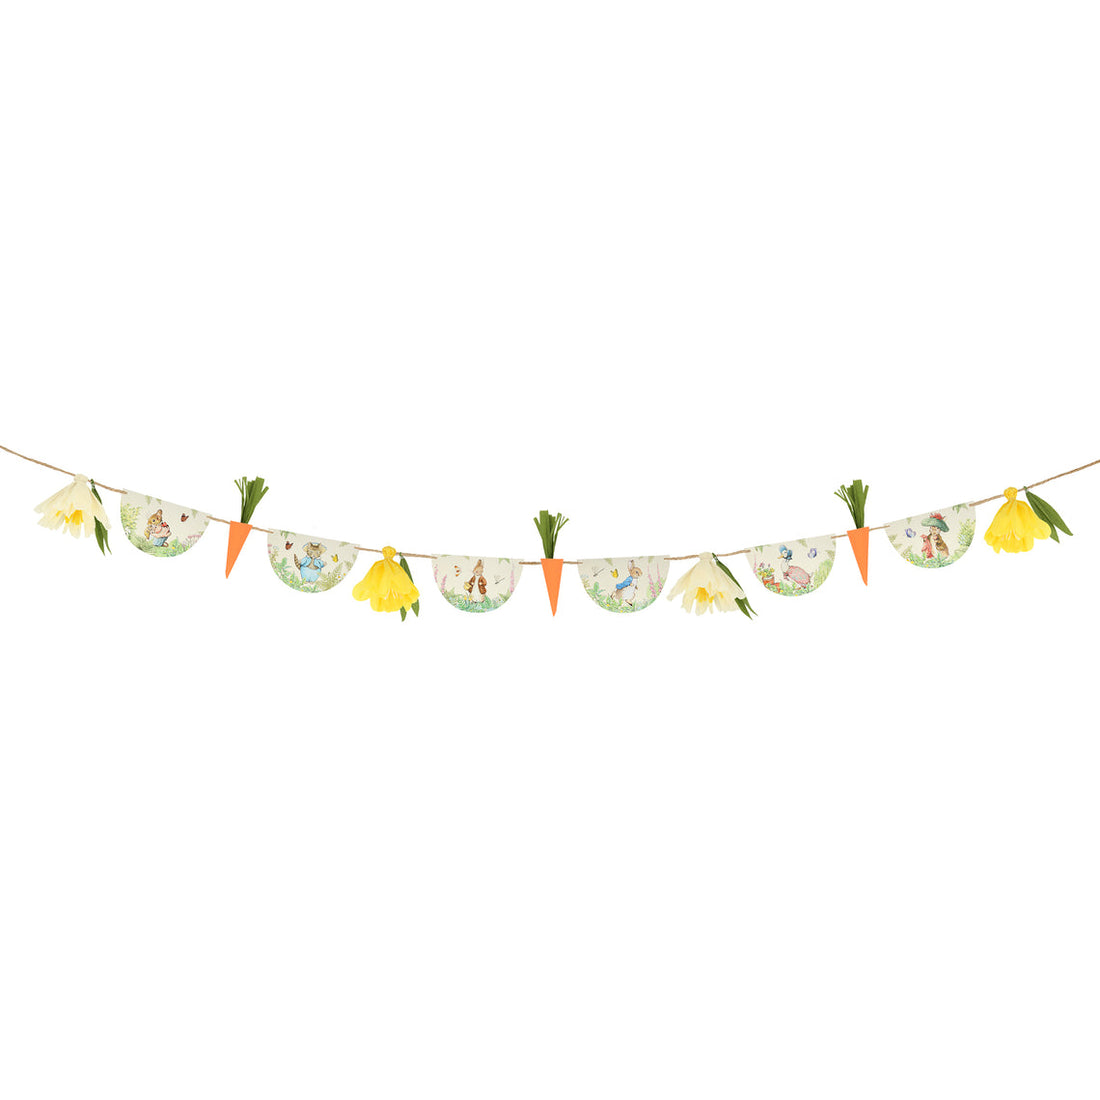 An Easter garland with Peter Rabbit in the Garden Garlands hanging as a bunny bunting. (by Meri Meri)